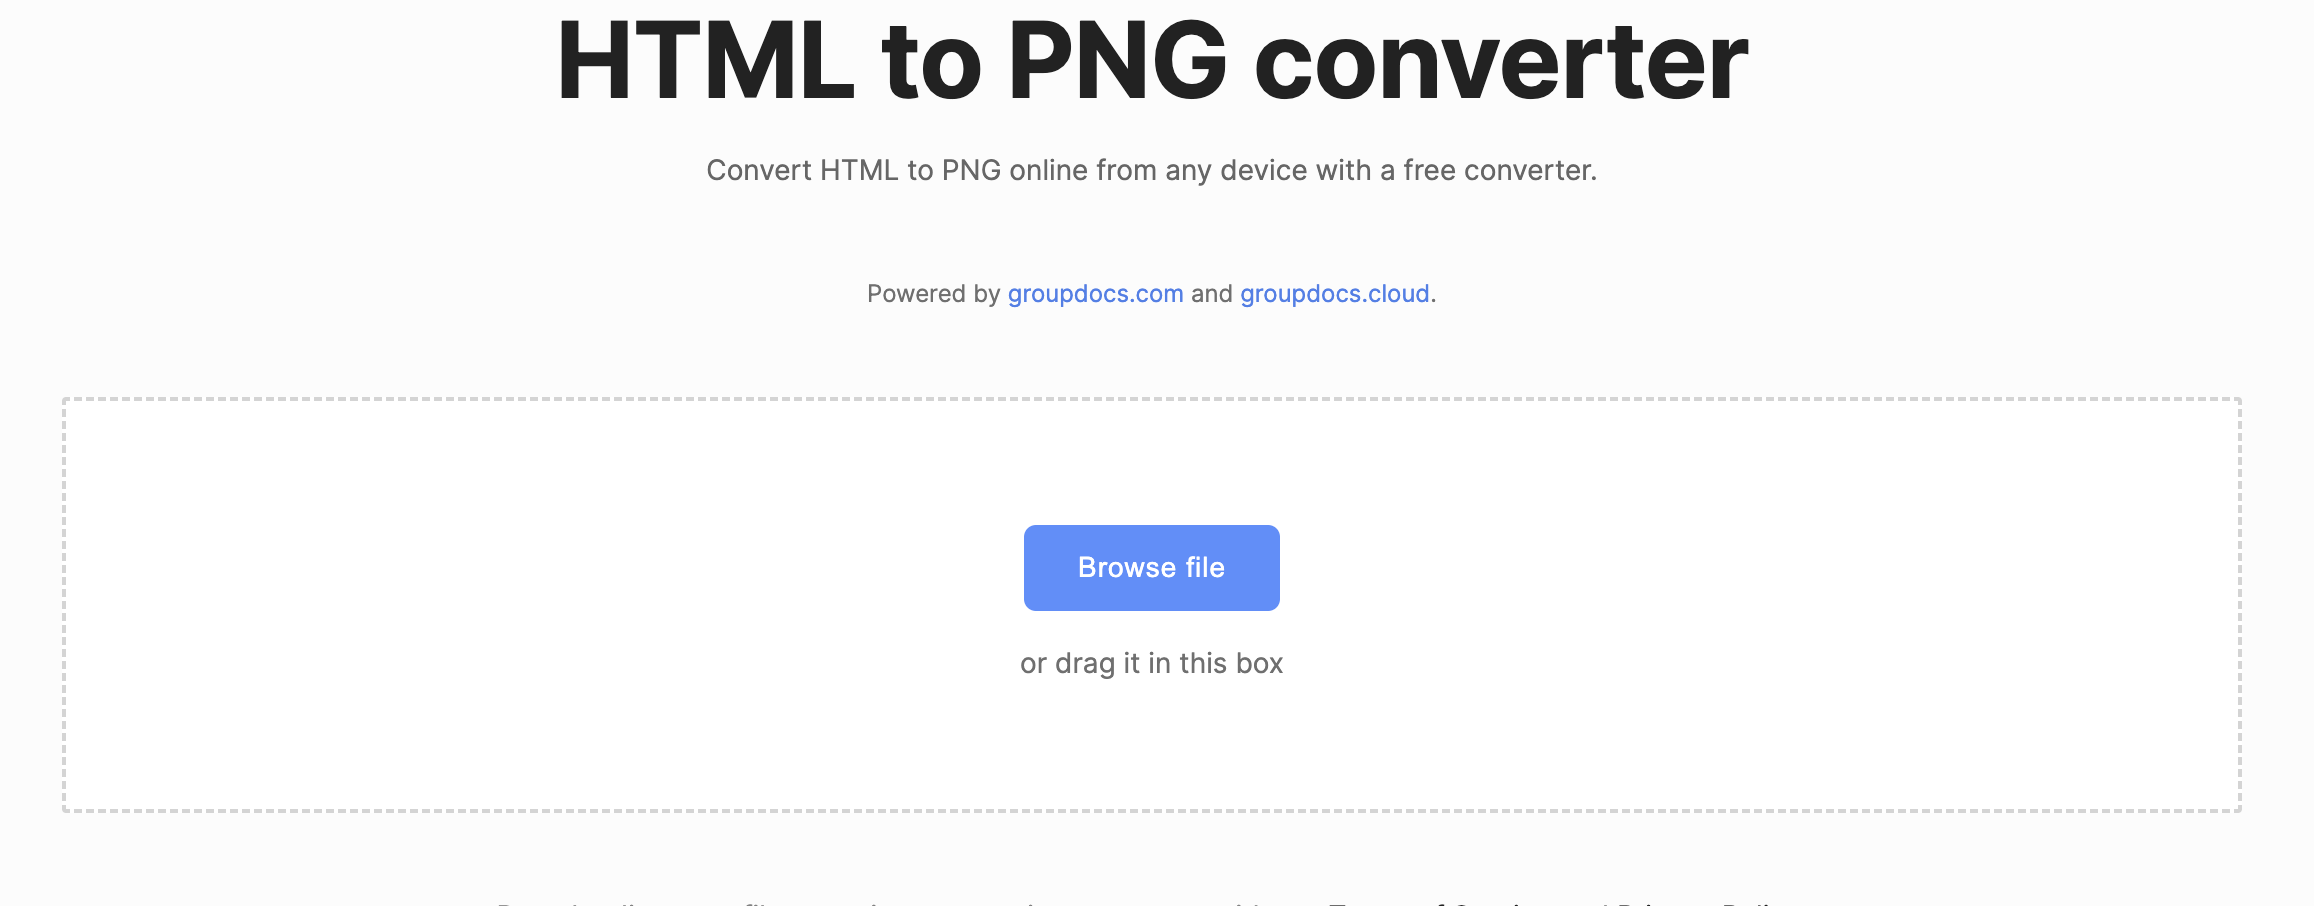 convert html to png online